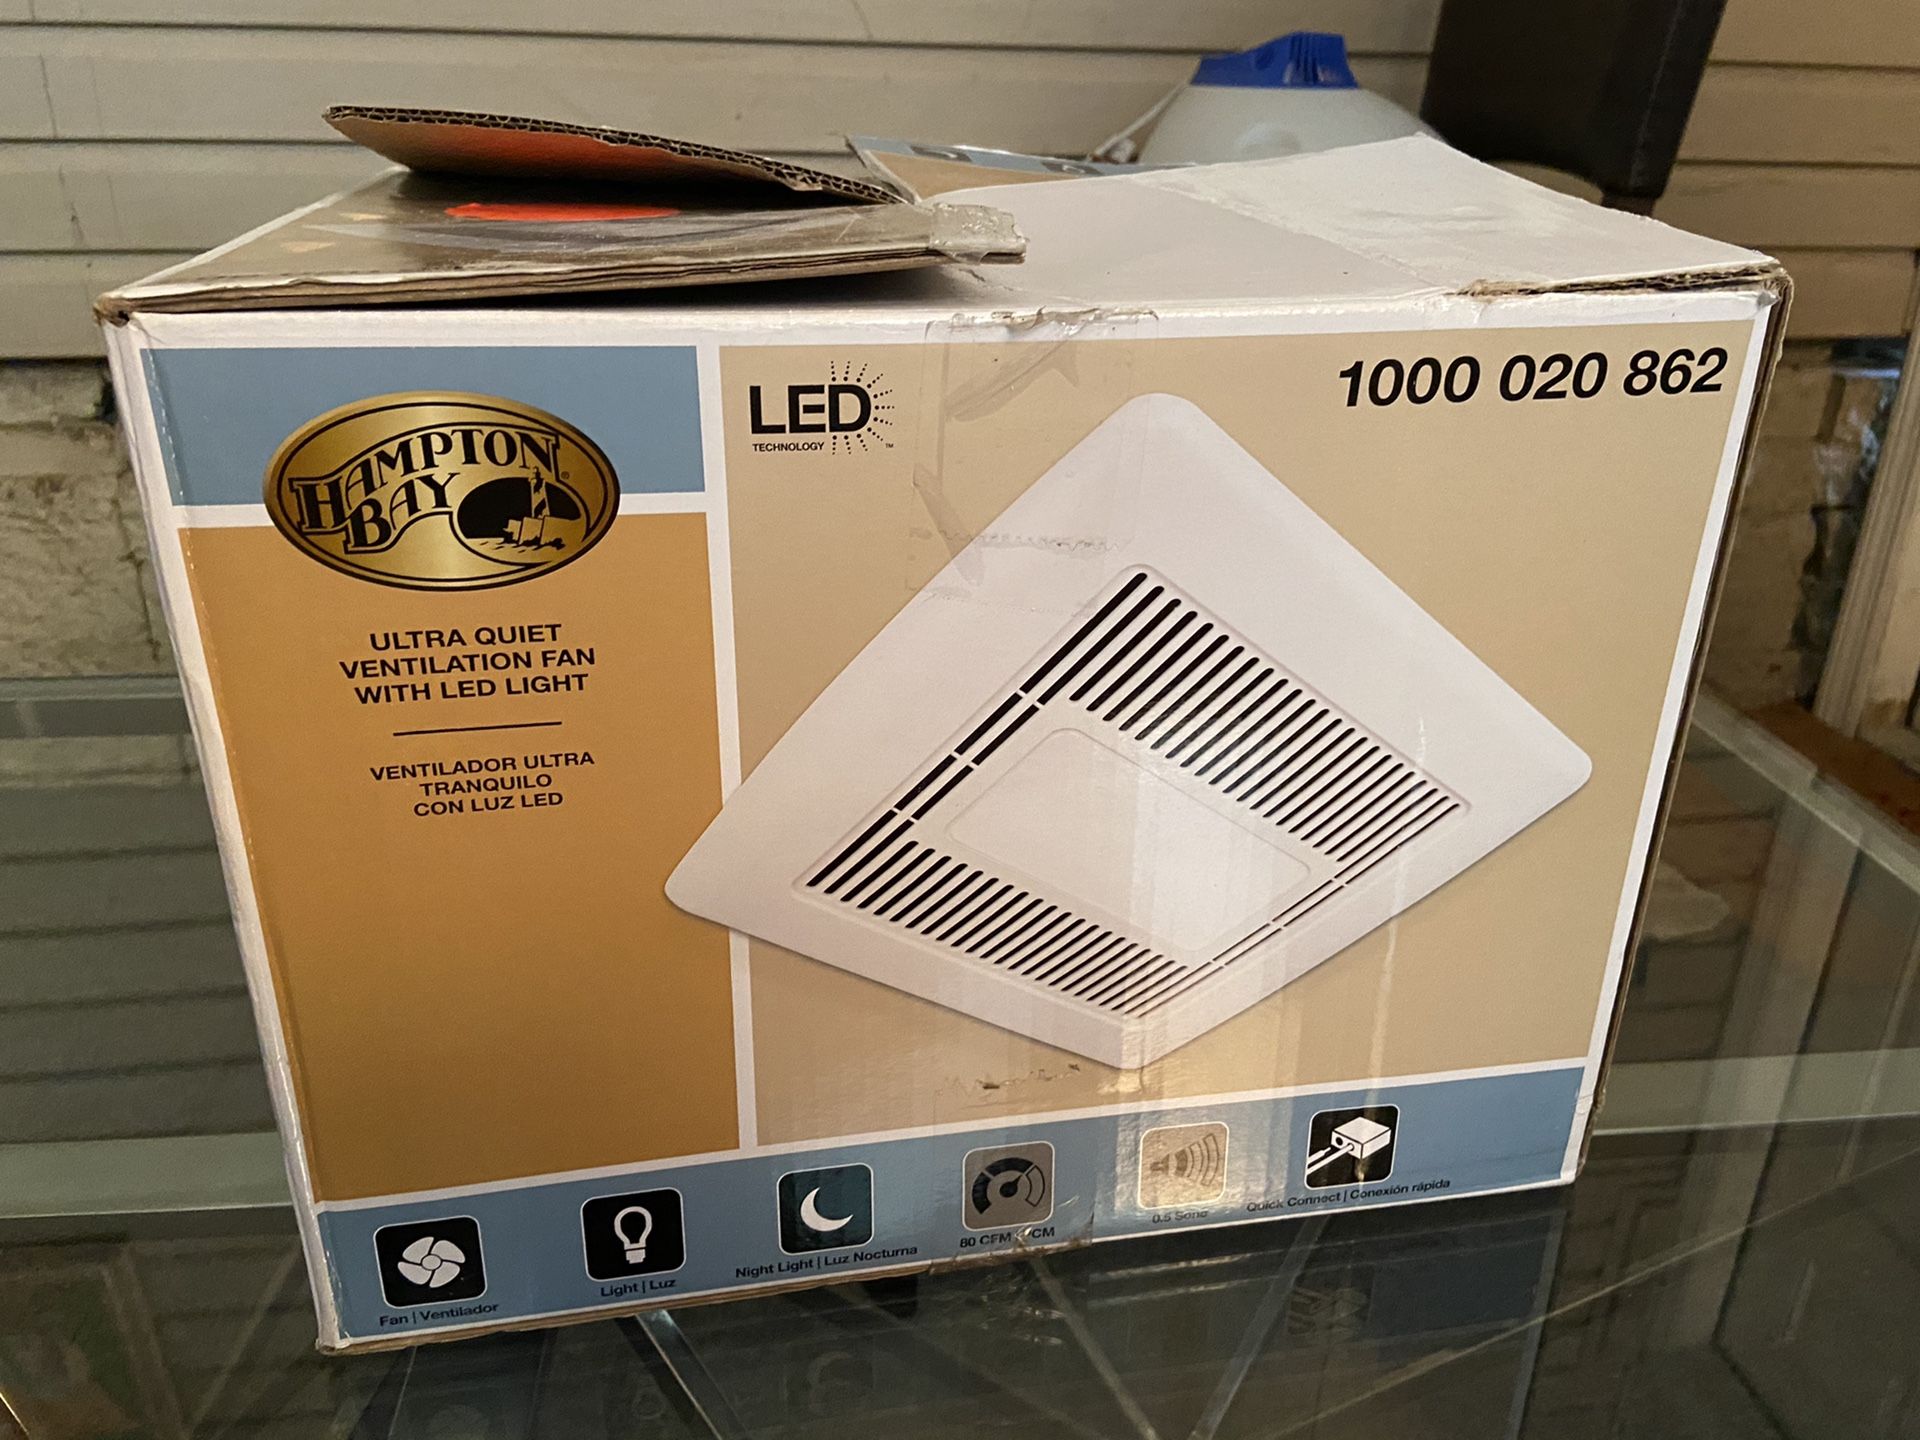 Ultra quiet ventilation with LED ligh